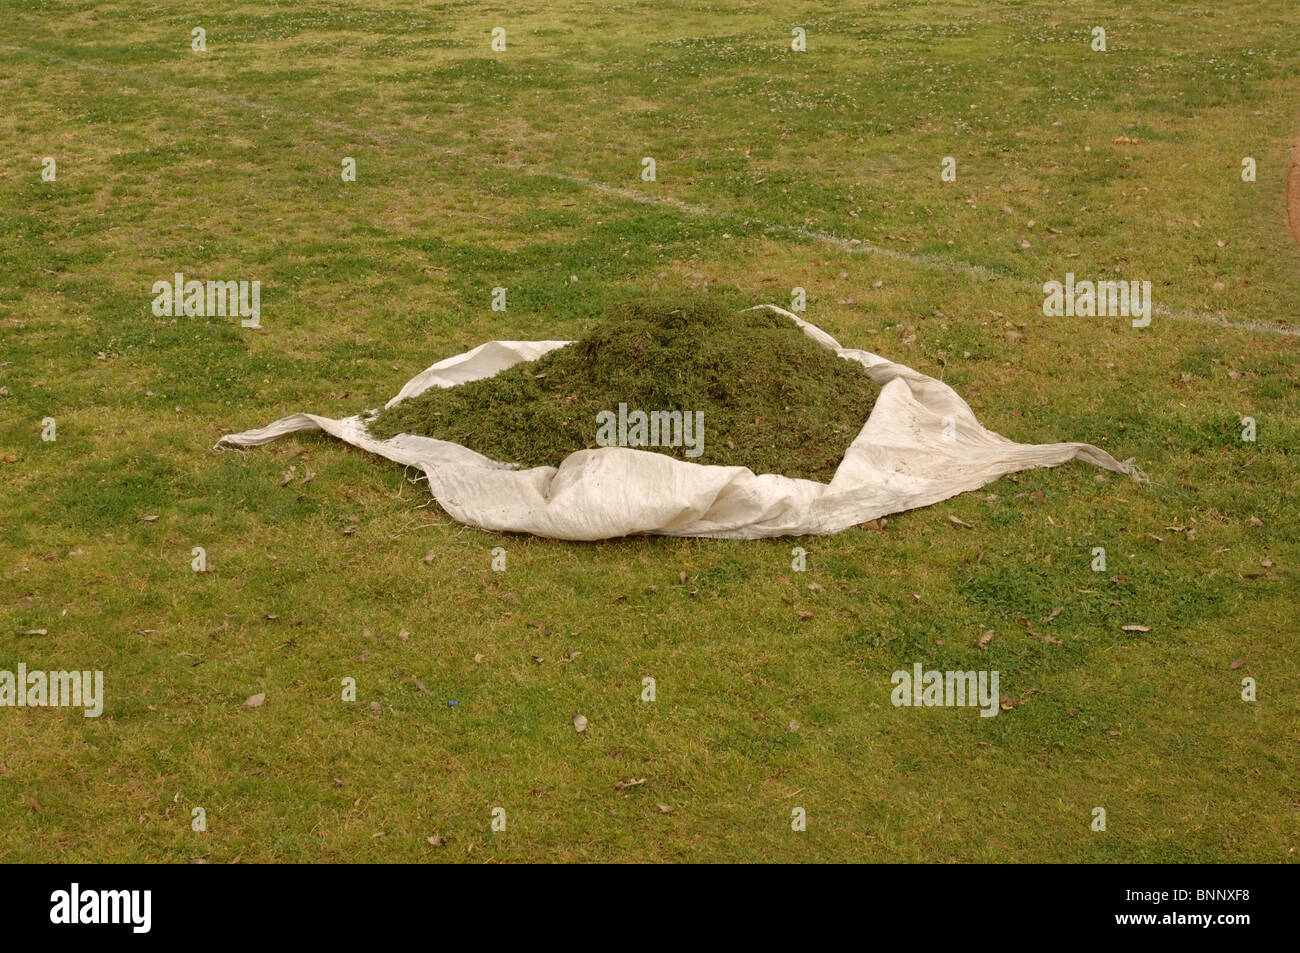 Freshly cut grass clippings on a tarp. Stock Photo